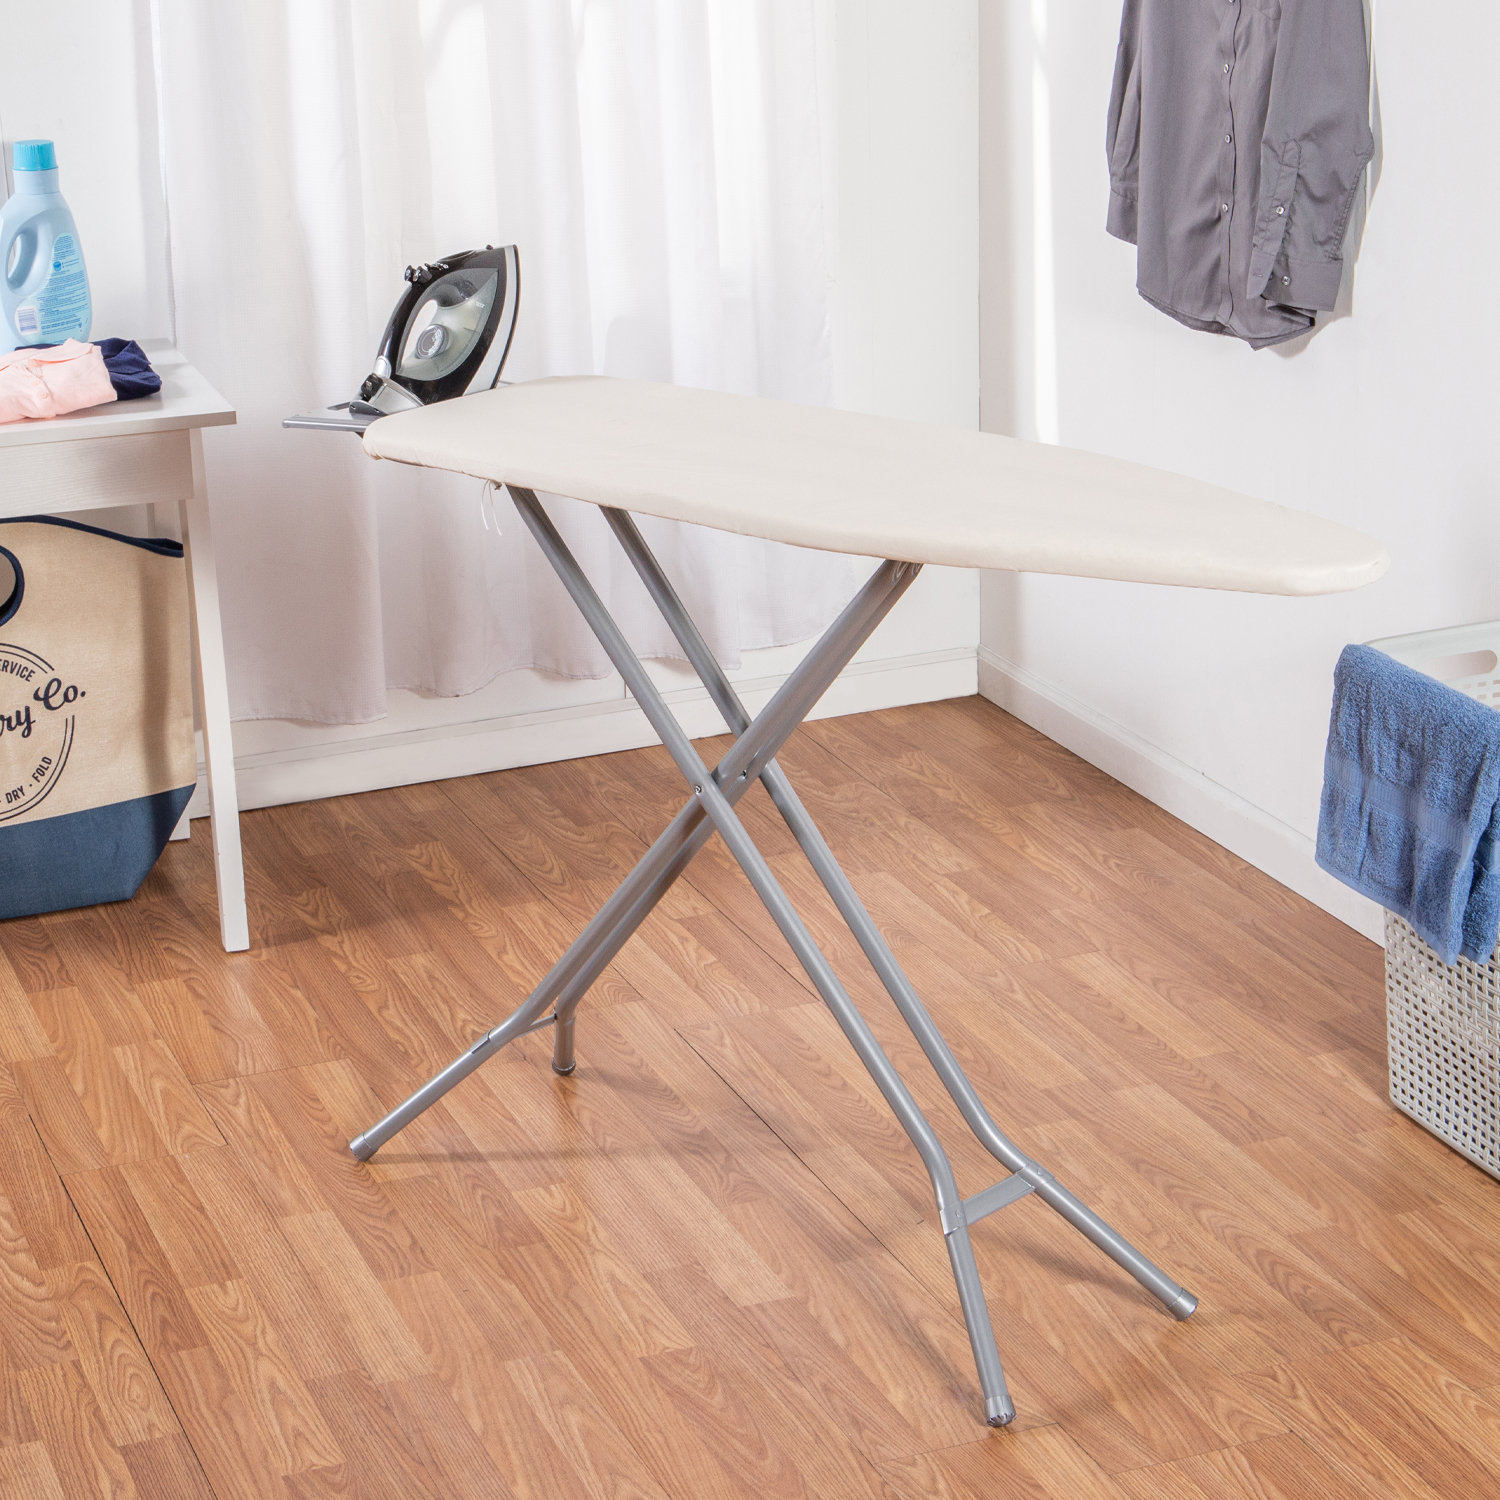 Mainstays 4-Leg Ironing Board with Pad and Cover 